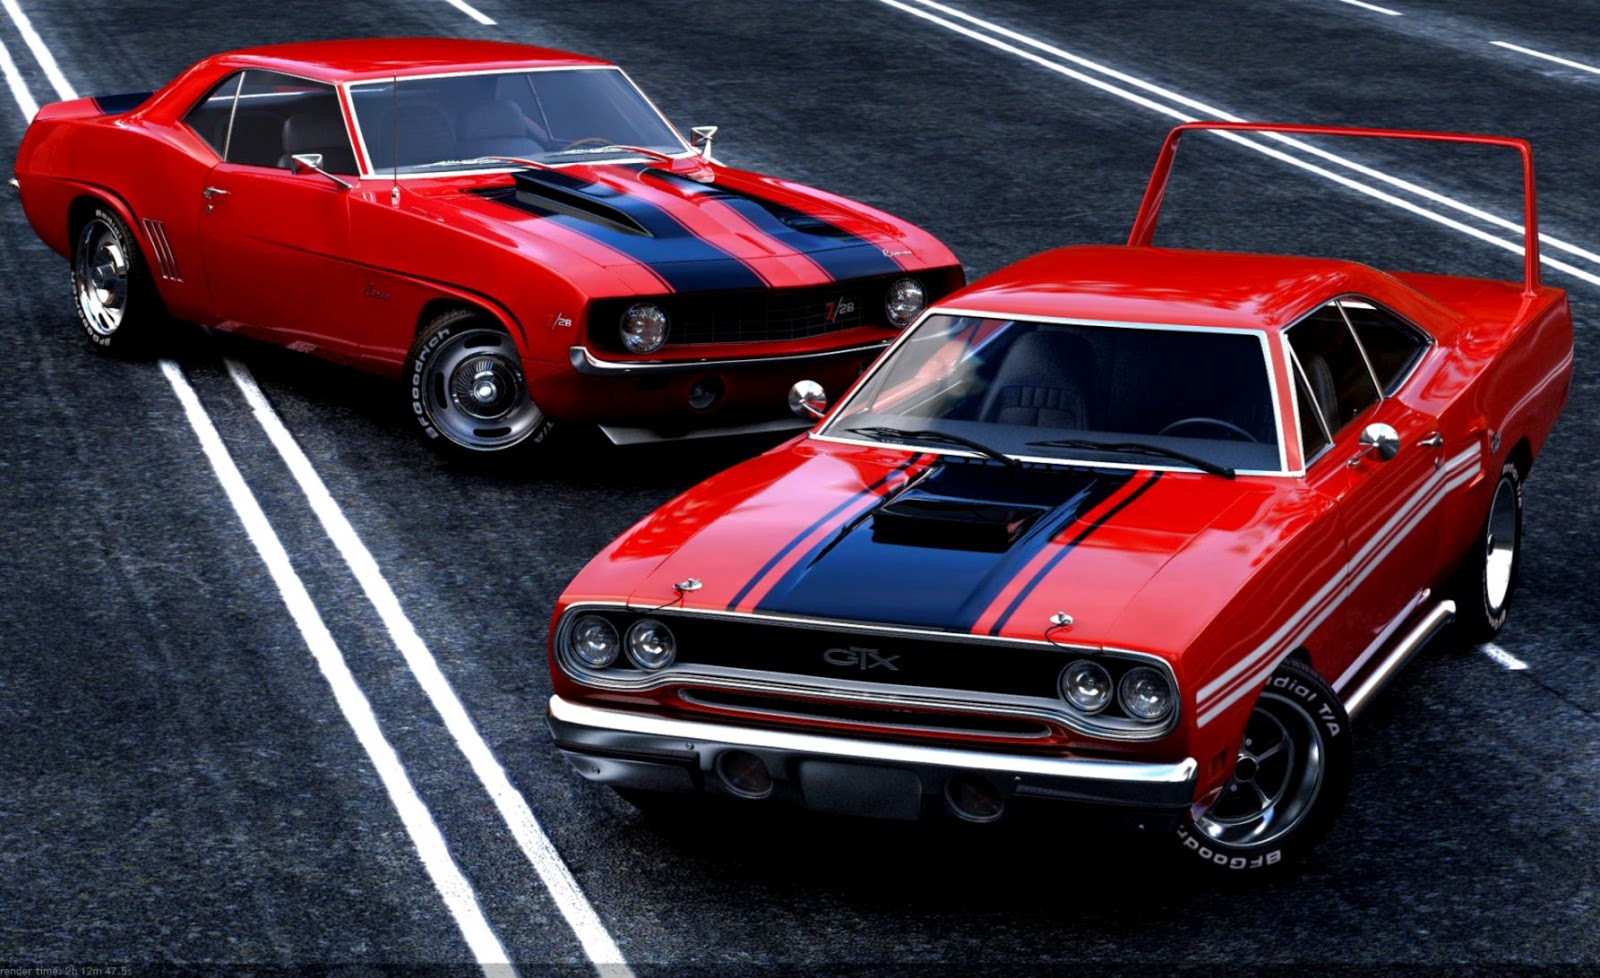 Cool Muscle Car Wallpapers Images, Best Wallpapers - Muscle Car Backgrounds Hd , HD Wallpaper & Backgrounds